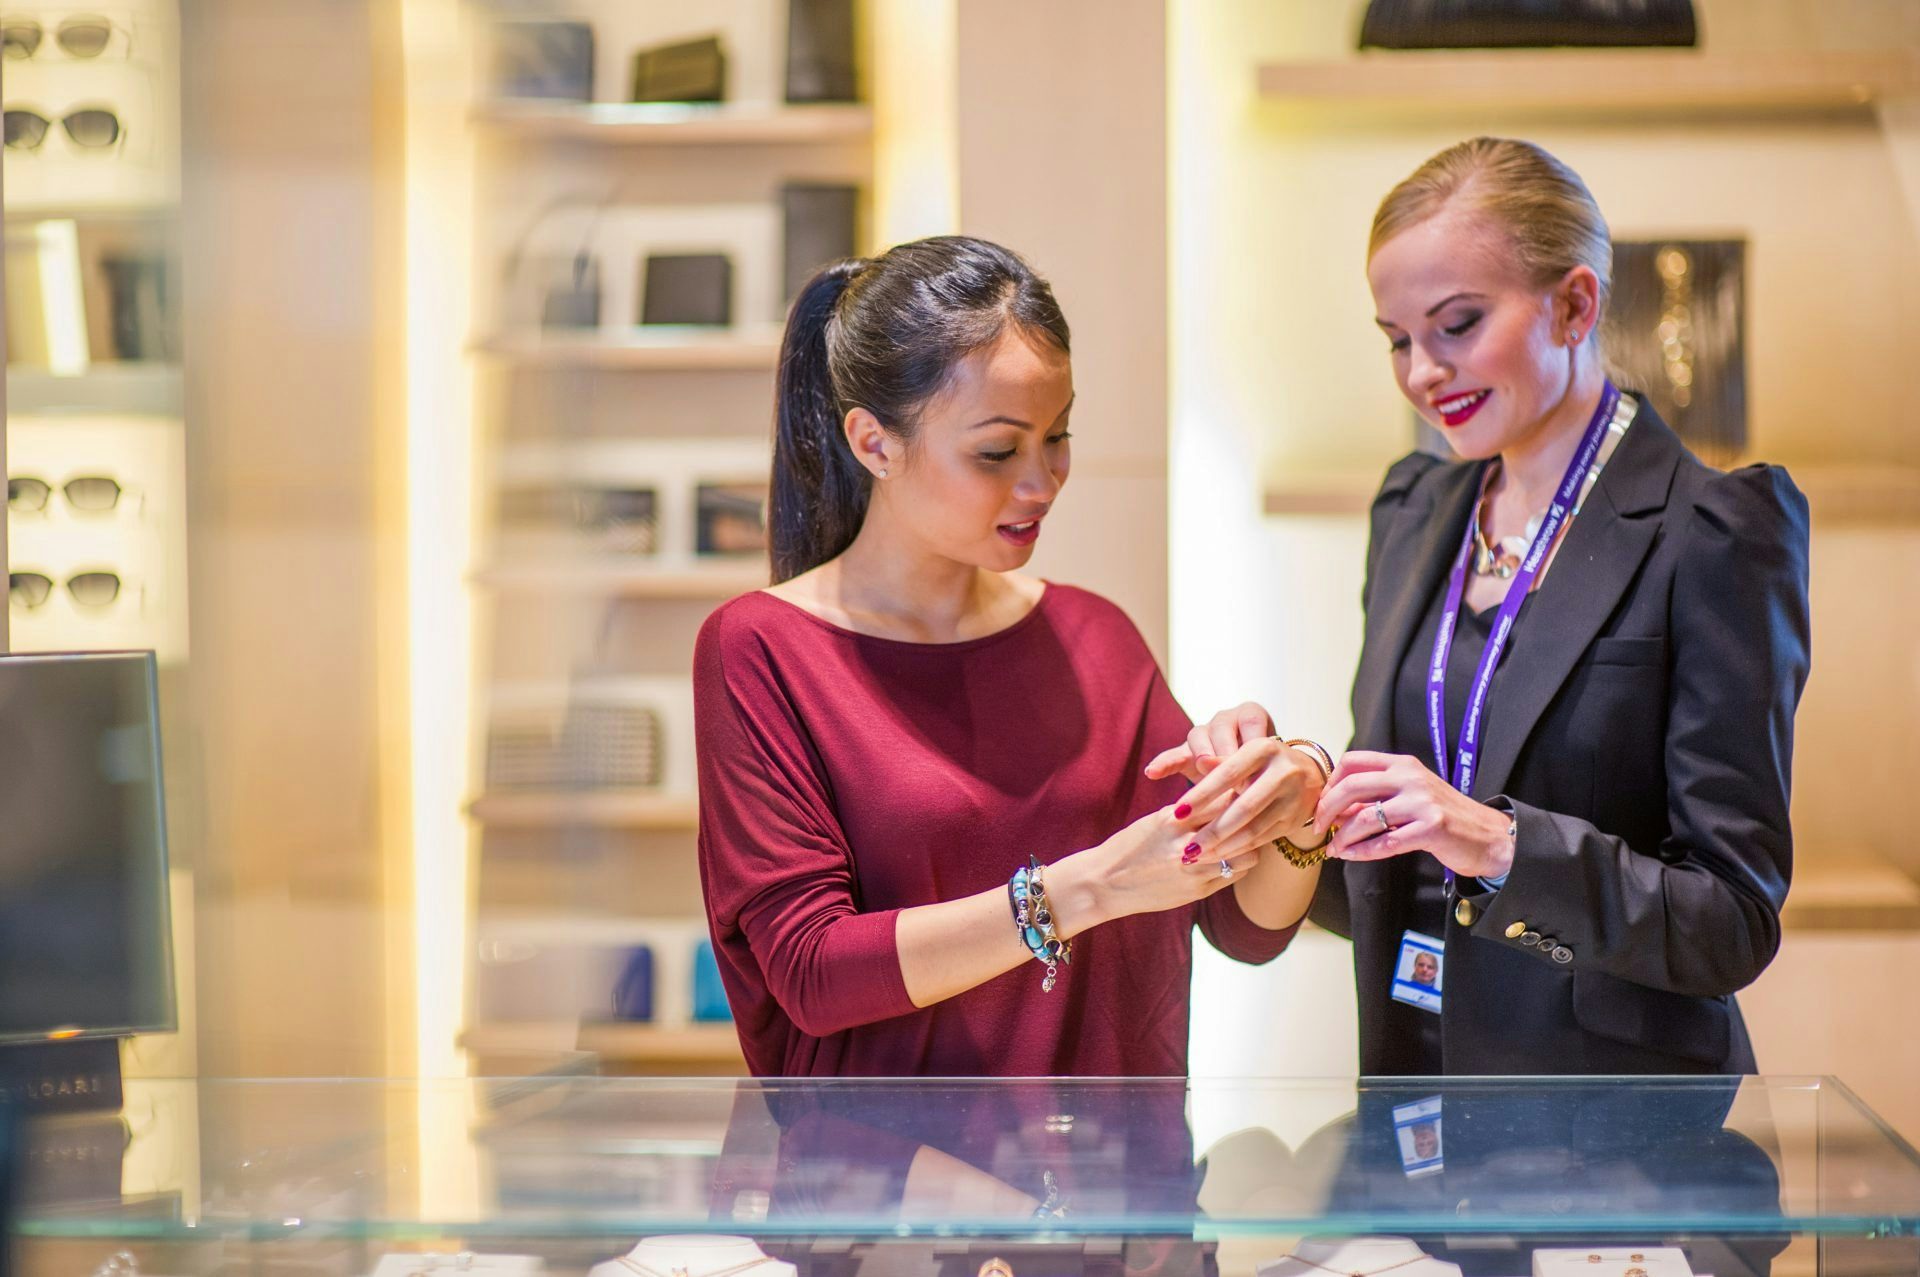 Heathrow ‘Passenger Ambassadors’ Secretly Encouraging Chinese Travelers to Spend Money at Airport Stores